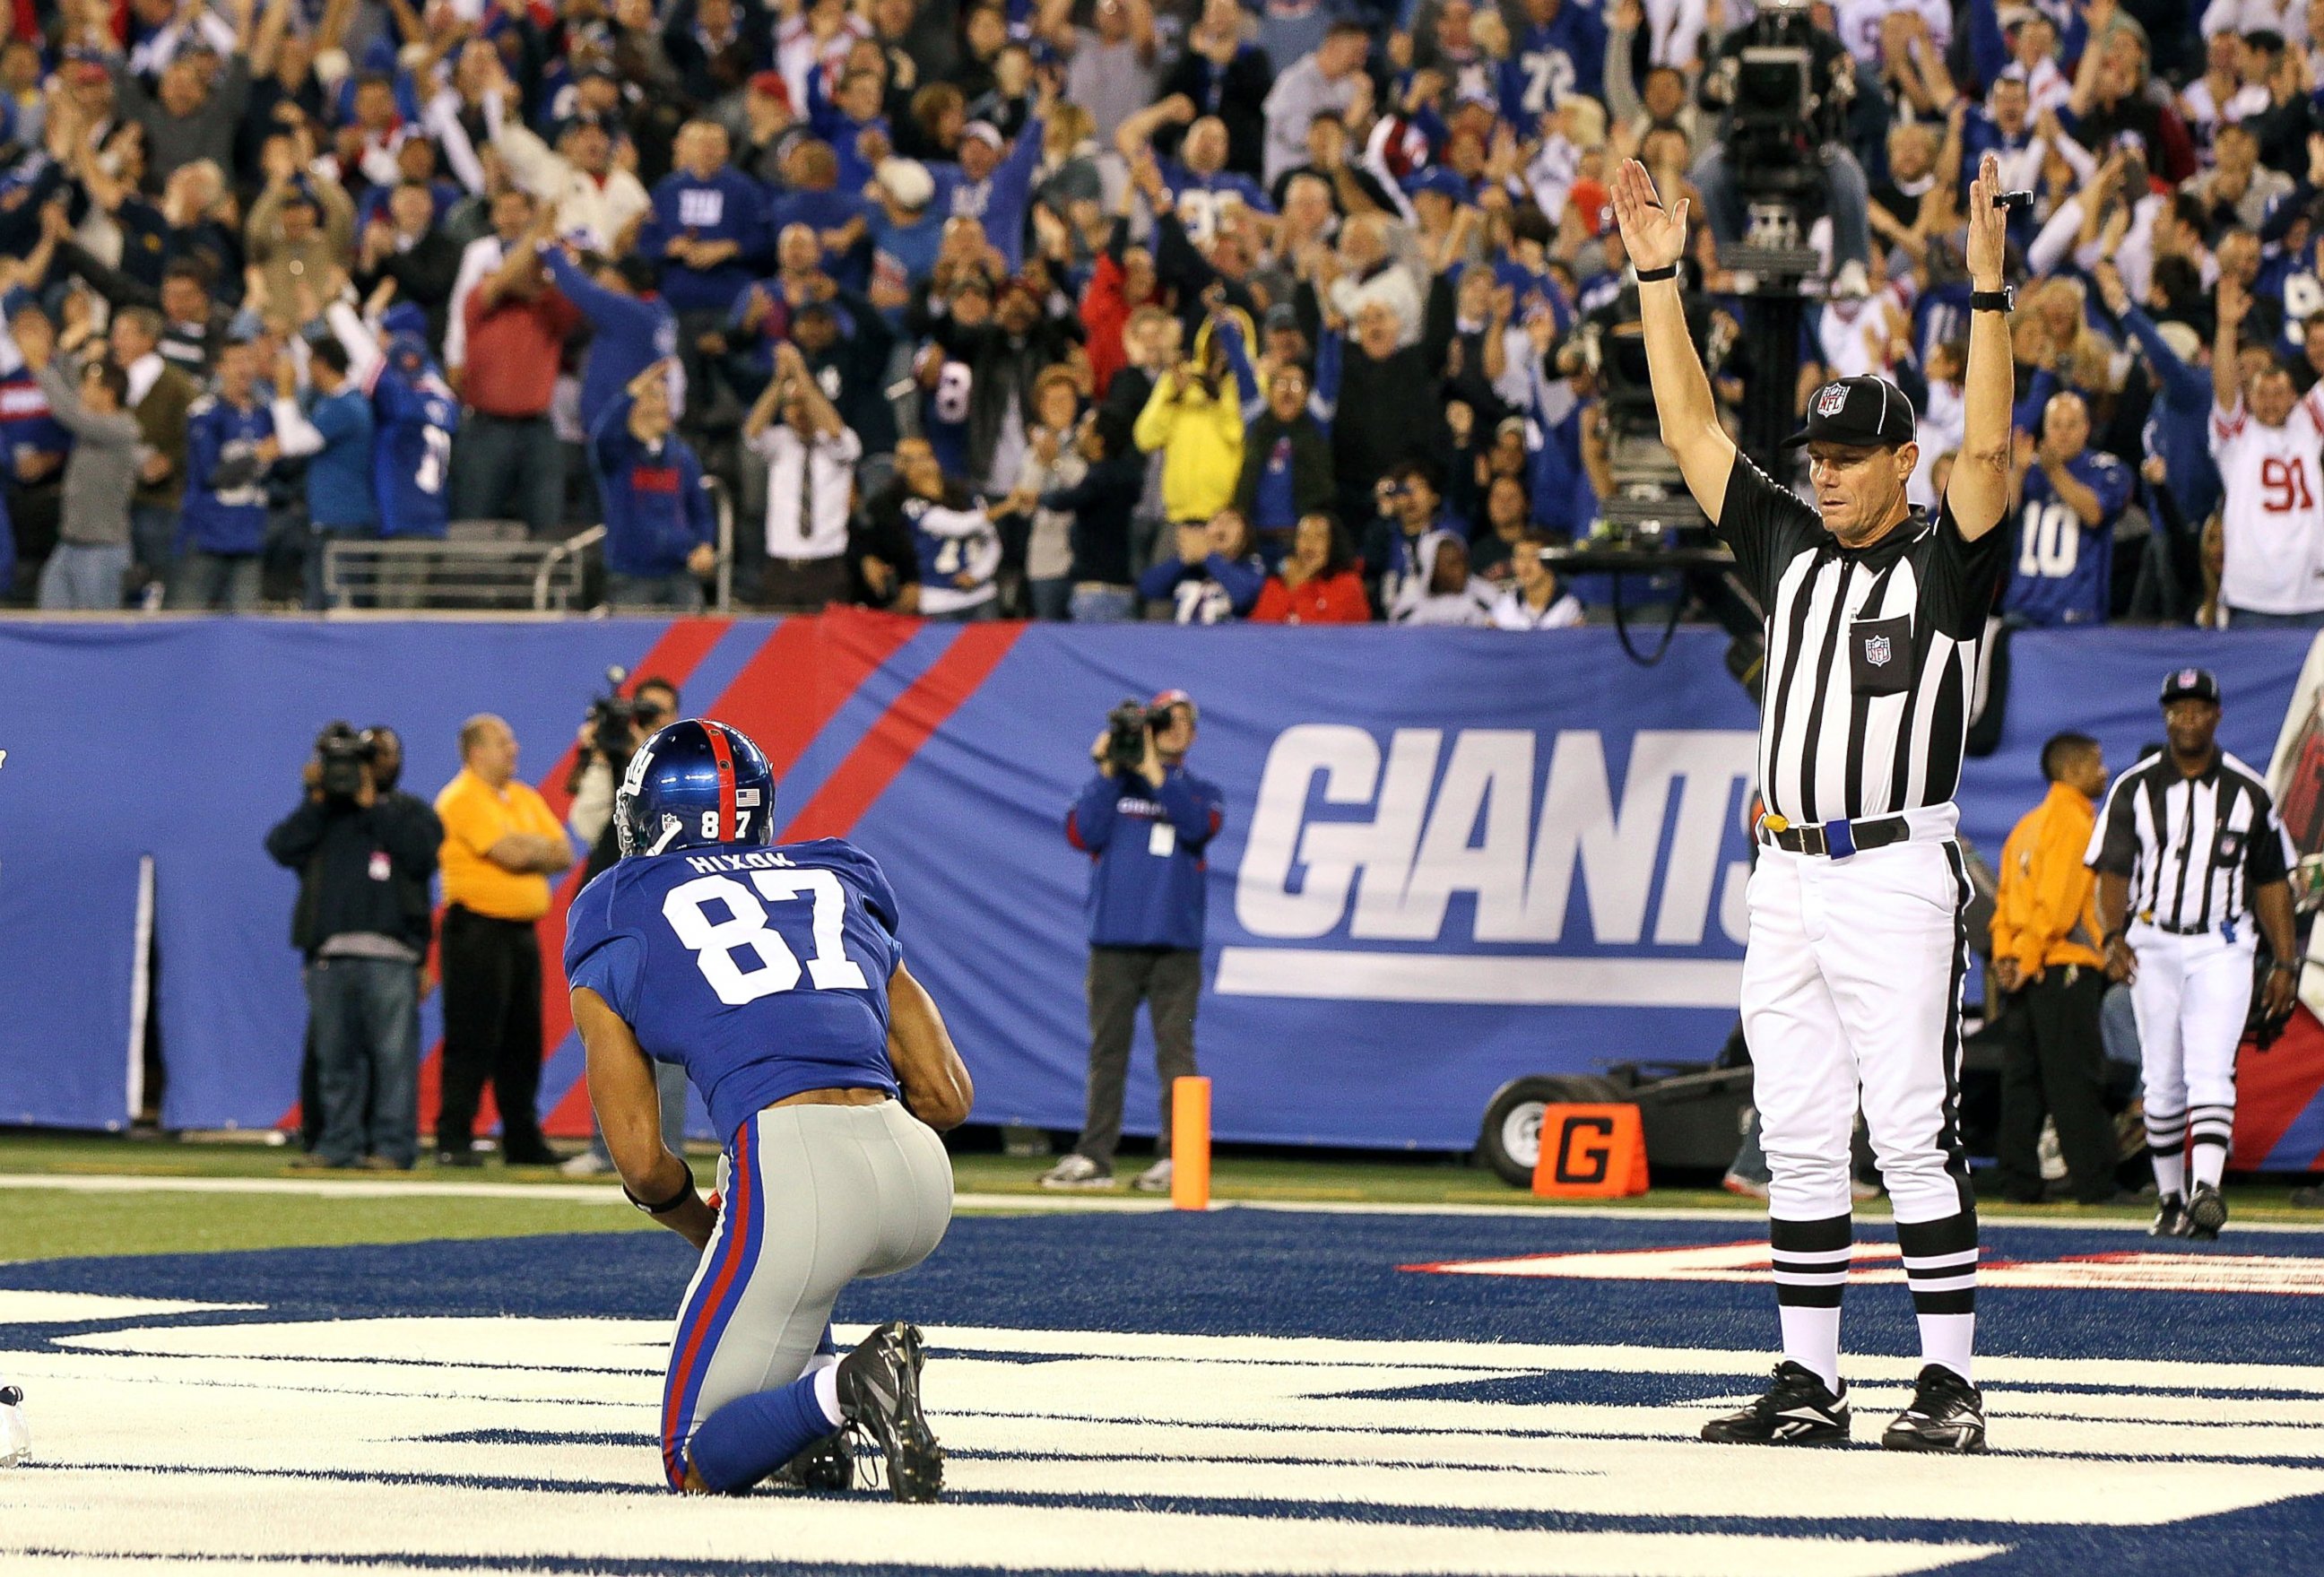 PHOTO: Domenik Hixon #87 of the New York Giants kneels in the endzone after his touchdown against the St. Louis Rams, Sept. 19, 2011, at MetLife Stadium in East Rutherford, N.J. The Giants defeated the Rams 28-16.